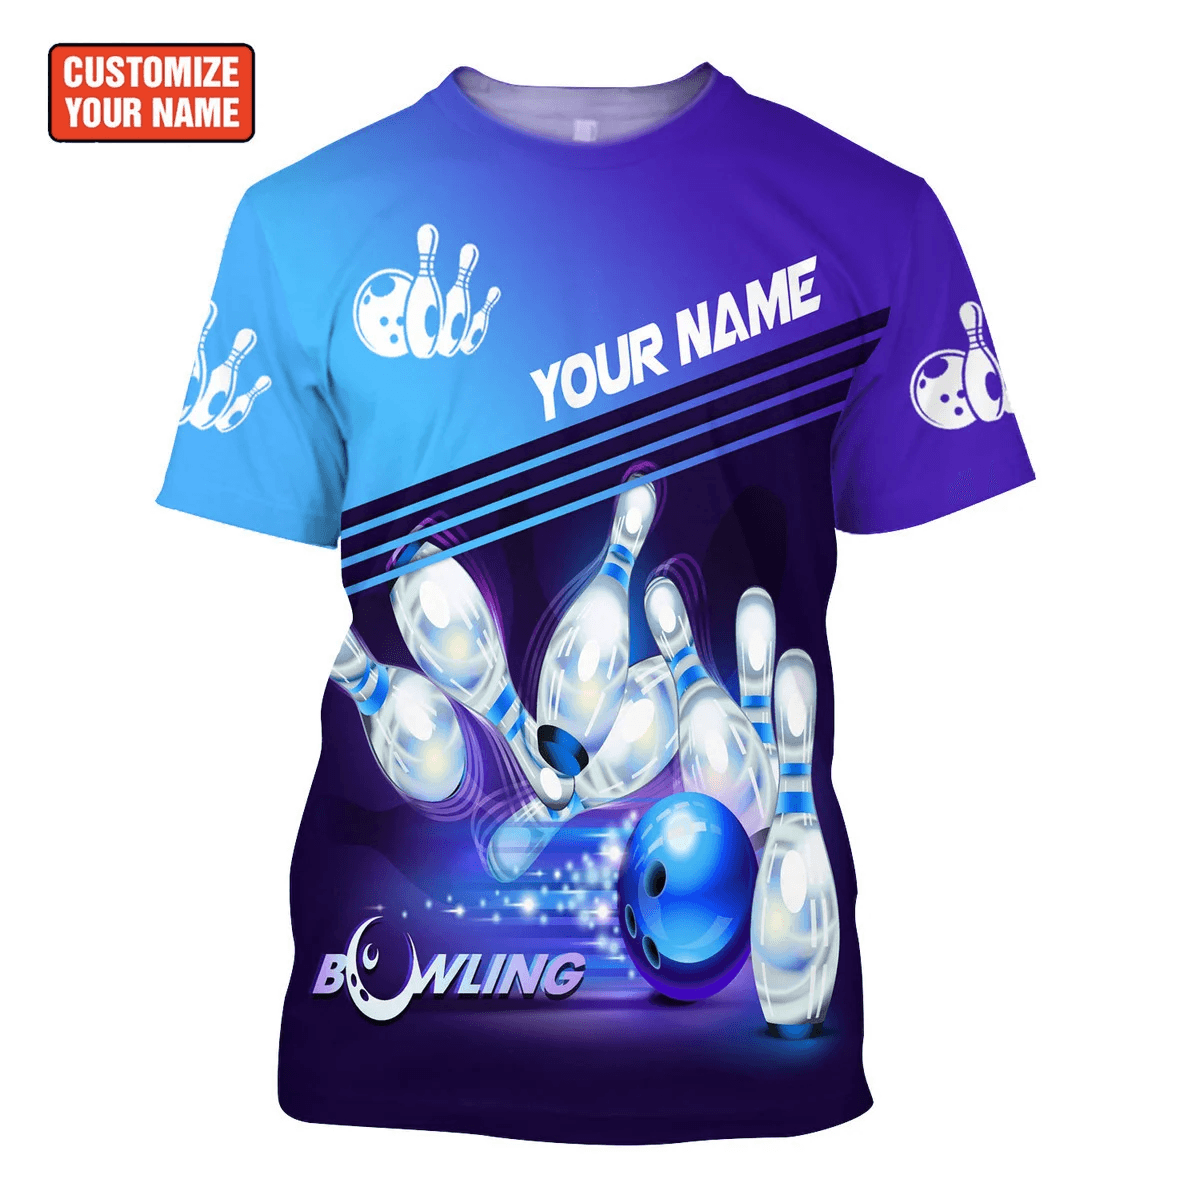 Customized Name Bowling T Shirt, Personalized Blue Bowling Shirt Team Uniform Player For Men - Perfect Gift For Bowling Lovers, Bowlers - Amzanimalsgift